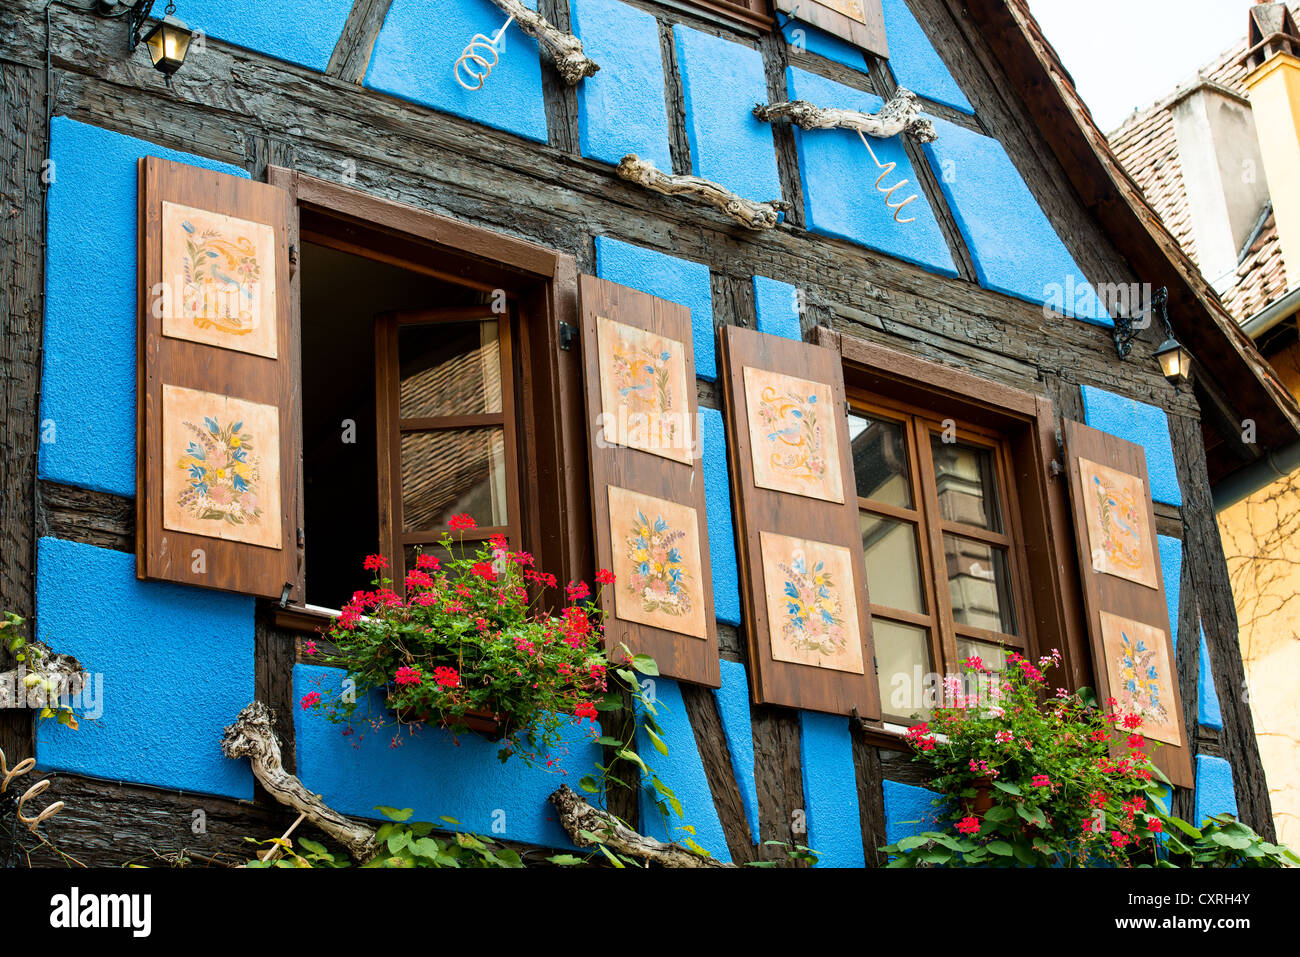 Historic old blue house in town of Riquewihr voges, France. Stock Photo